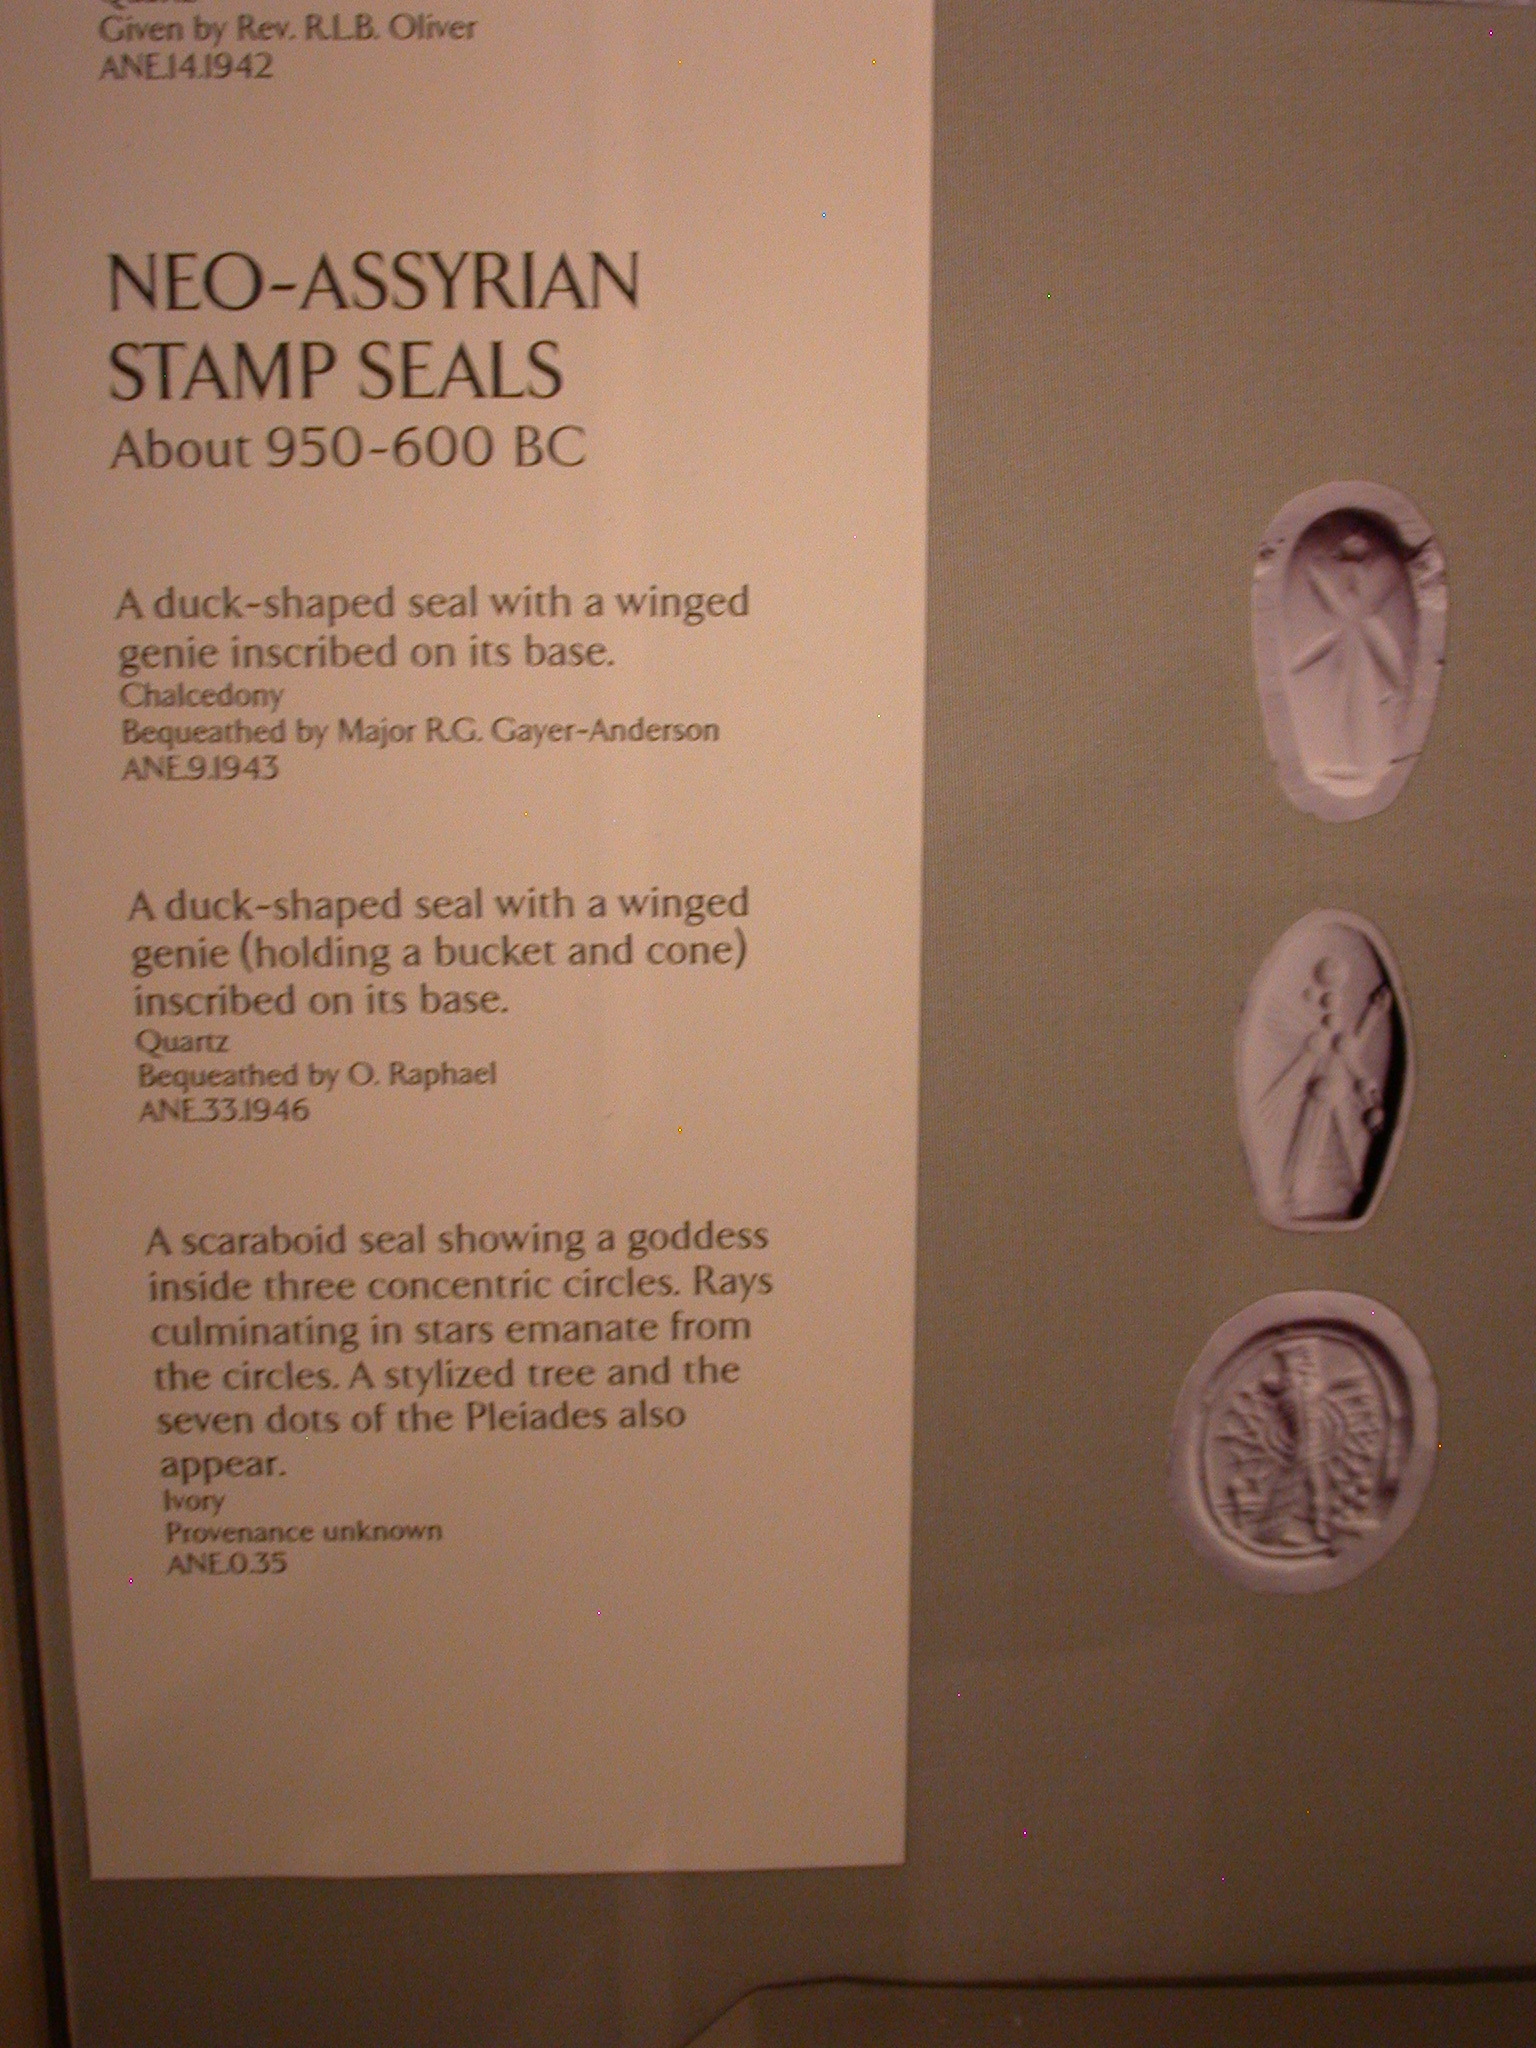 Neo-Assyrian Stamp Seals, About 950-600 BCE, in Fitzwilliam Museum, Cambridge, England